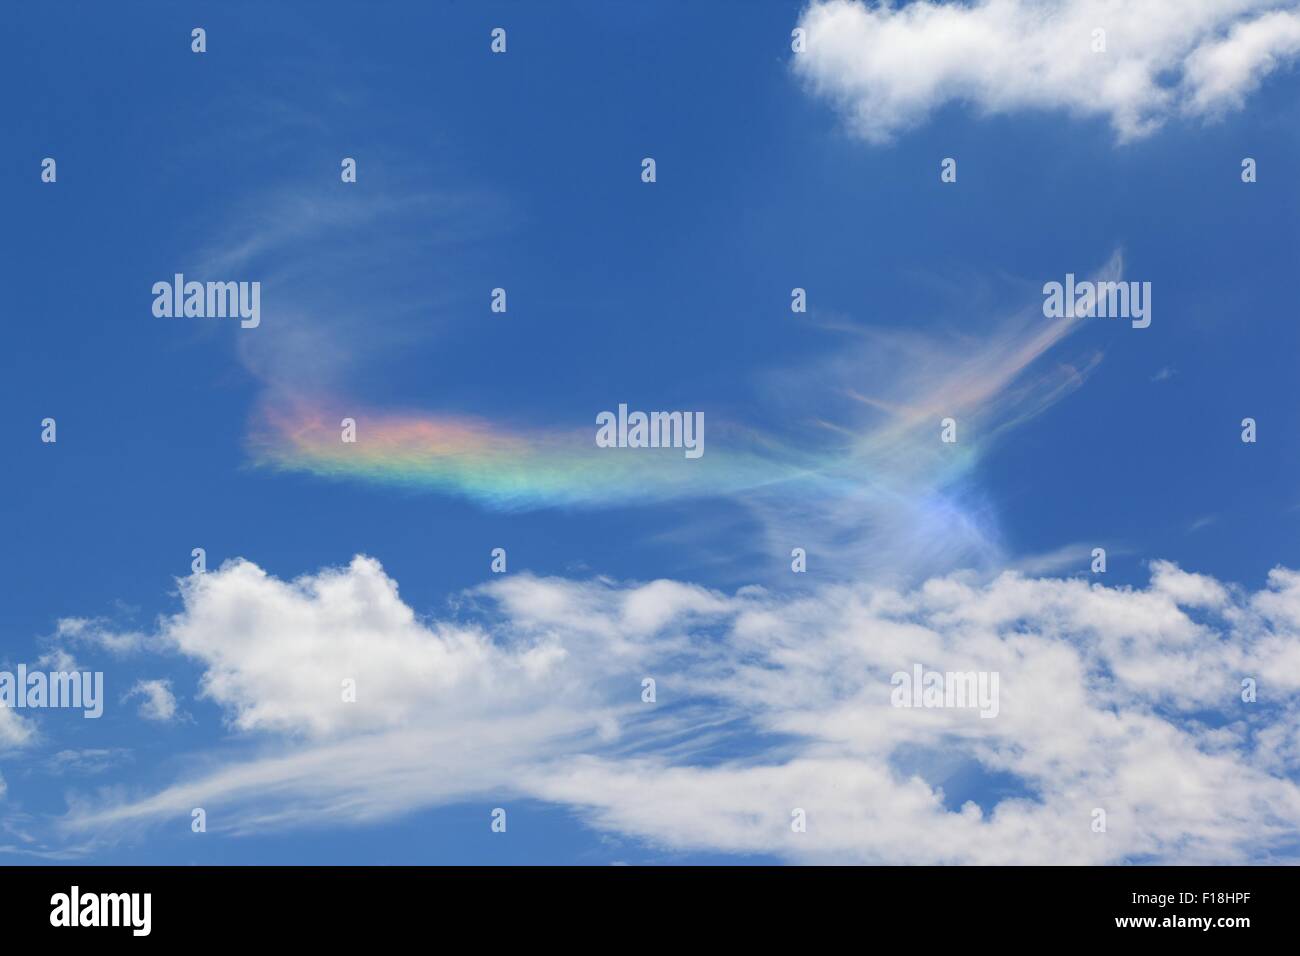 Fire Rainbow in Clouds Stock Photo